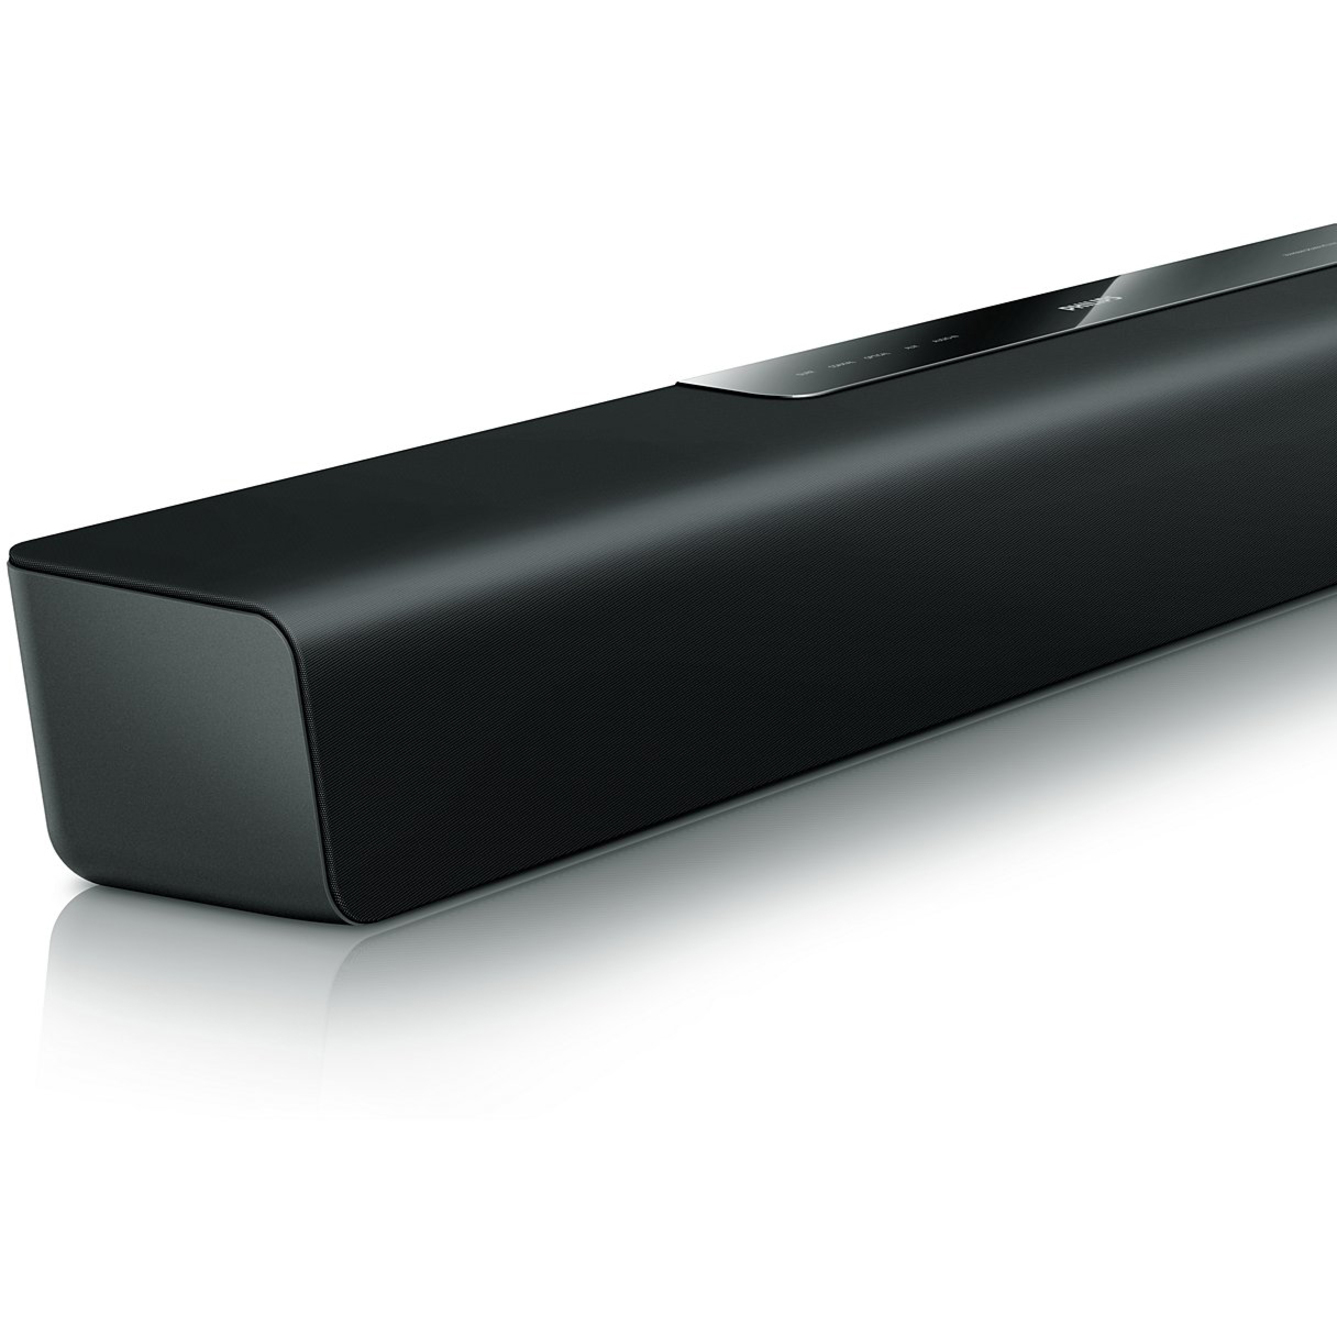 Philips HTL2101A - Sound bar - for home theater - 40 Watt (total) - image 4 of 4